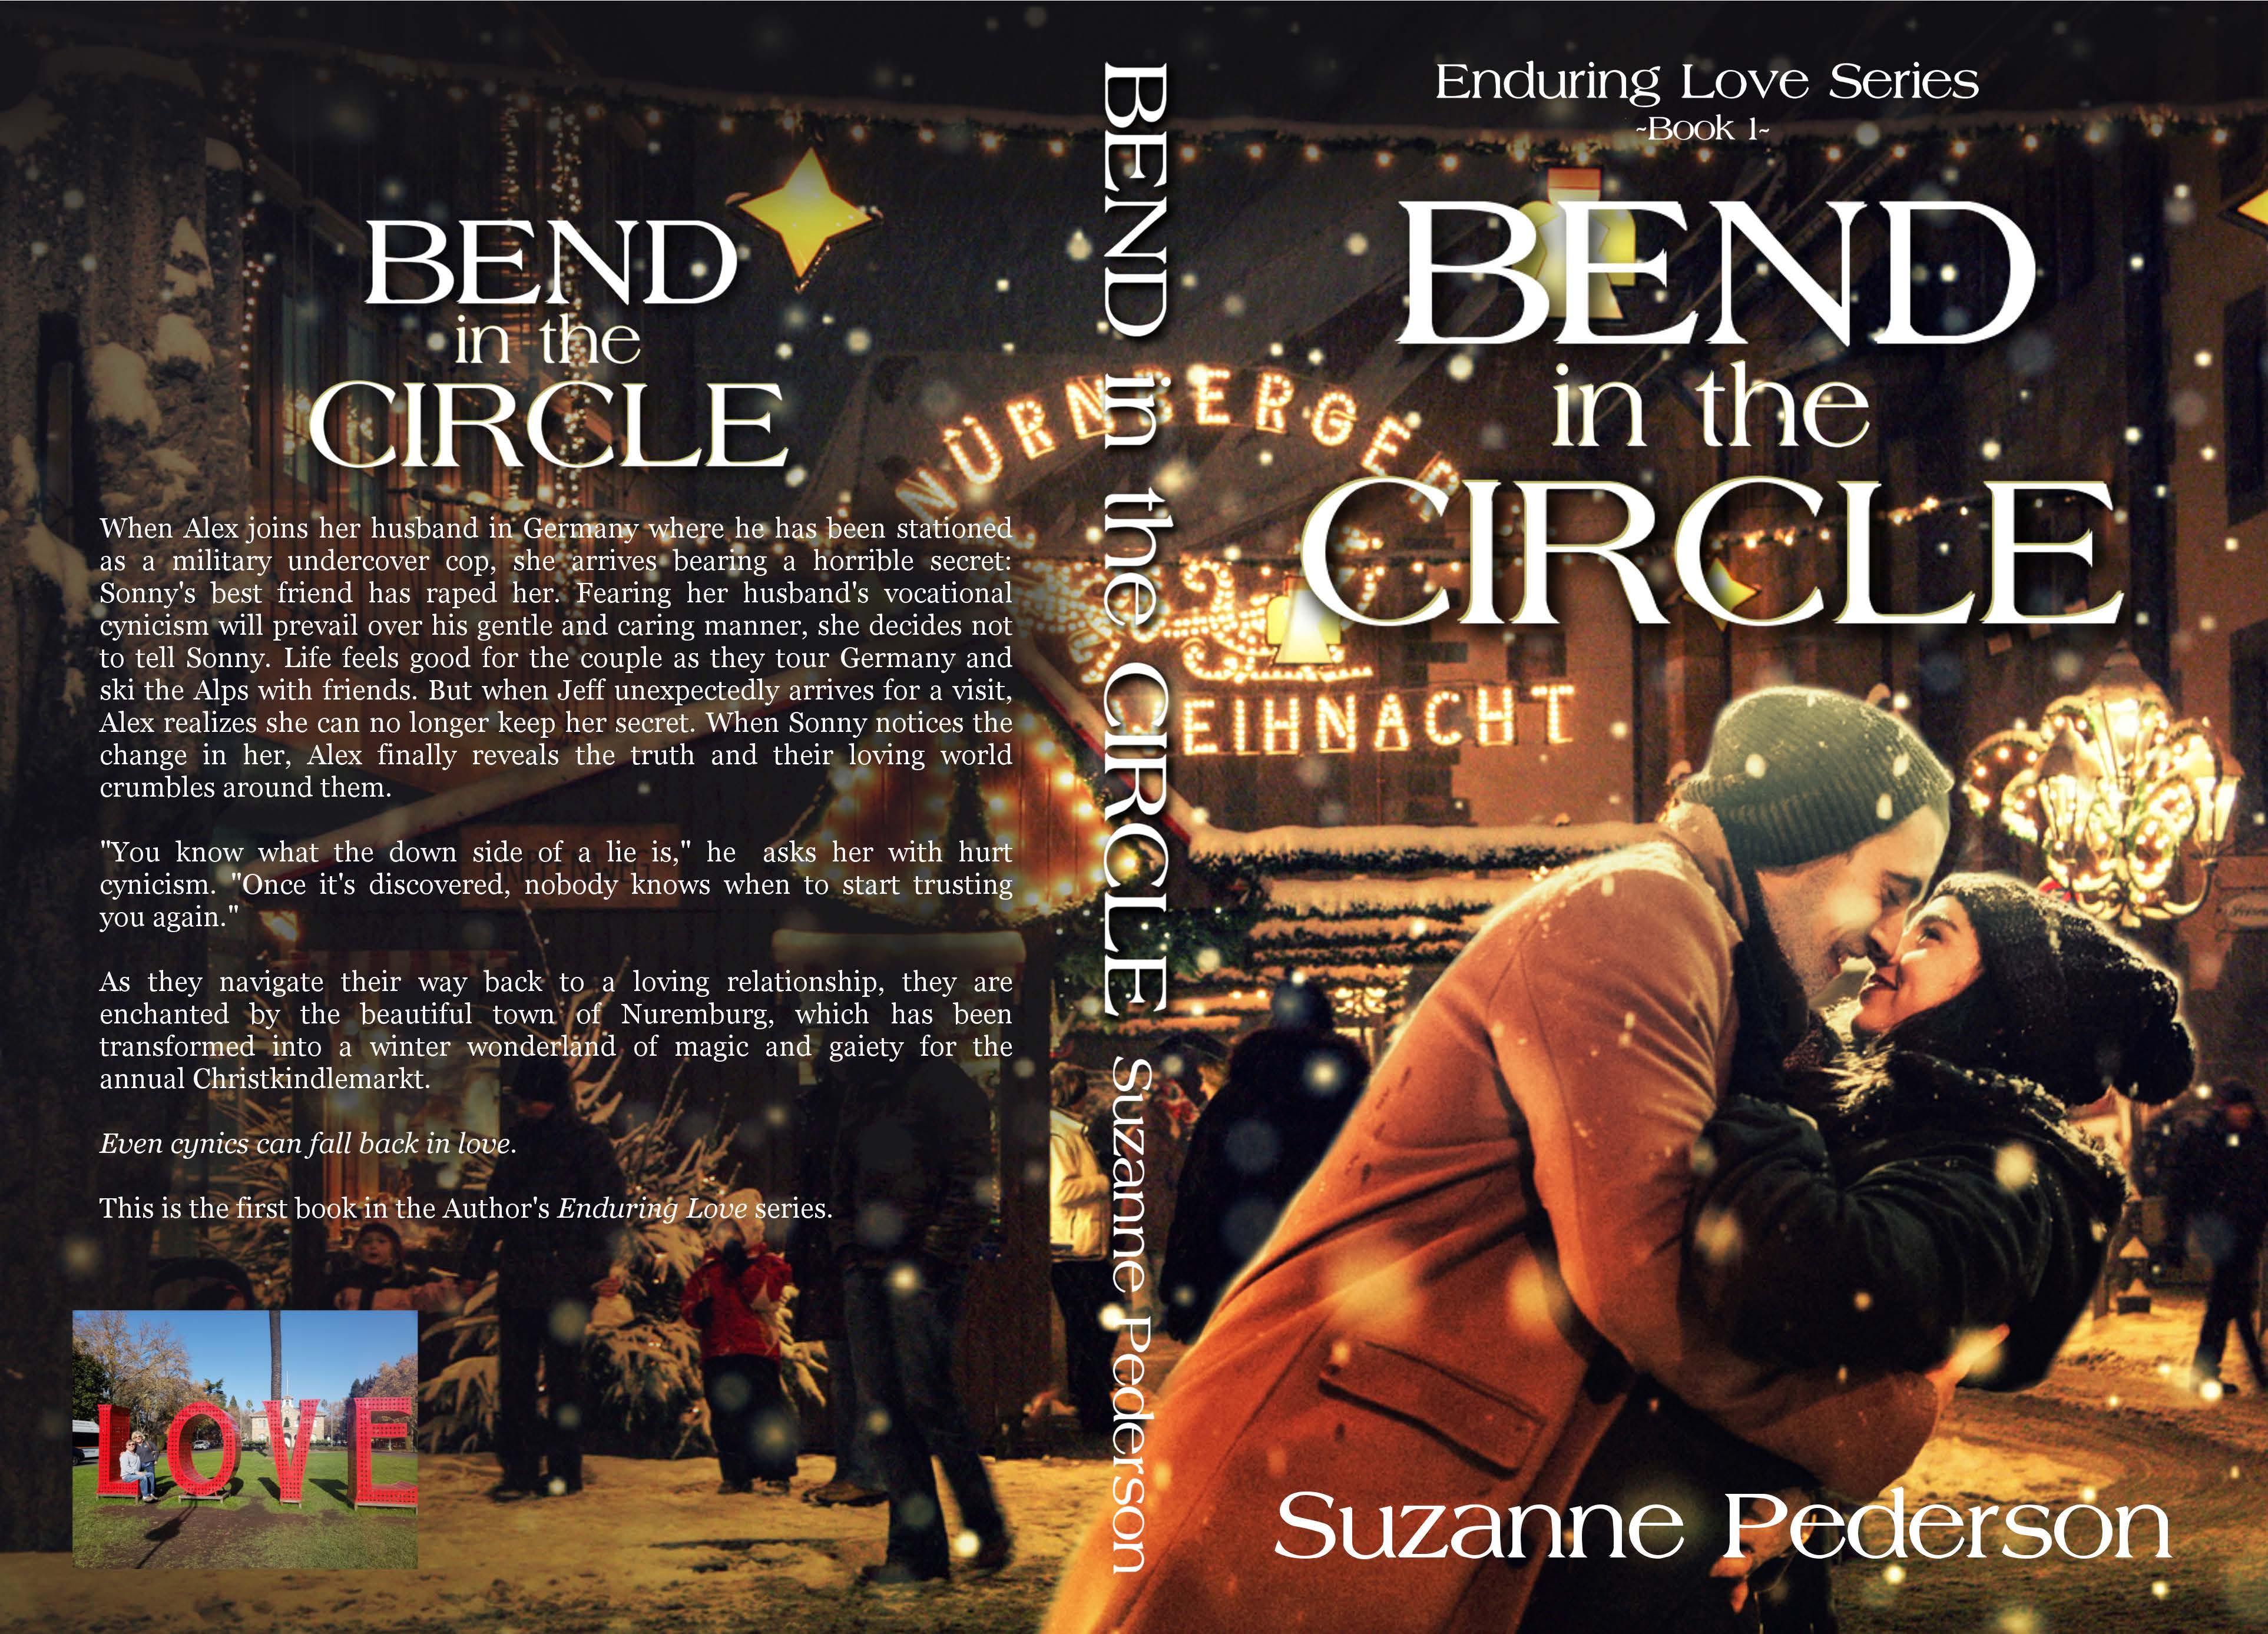 Bend in the Circle - Book 1 in the Enduring Love series